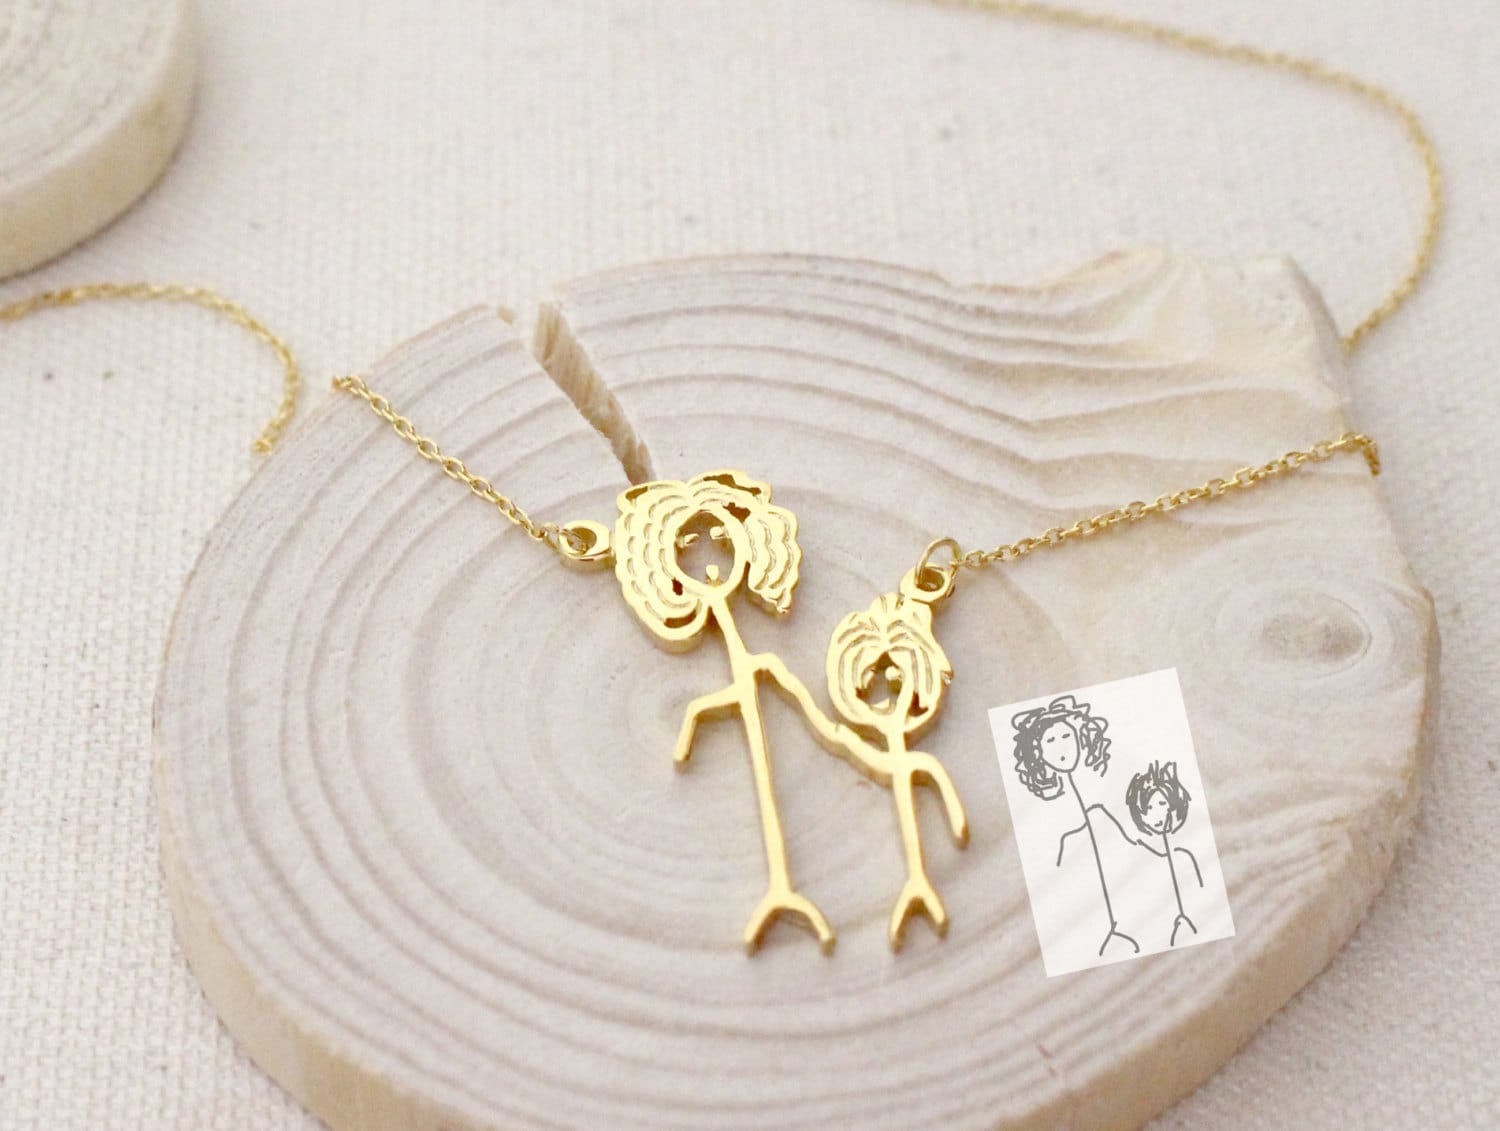 Now You Can Turn Your Child's Drawing Into A Necklace!